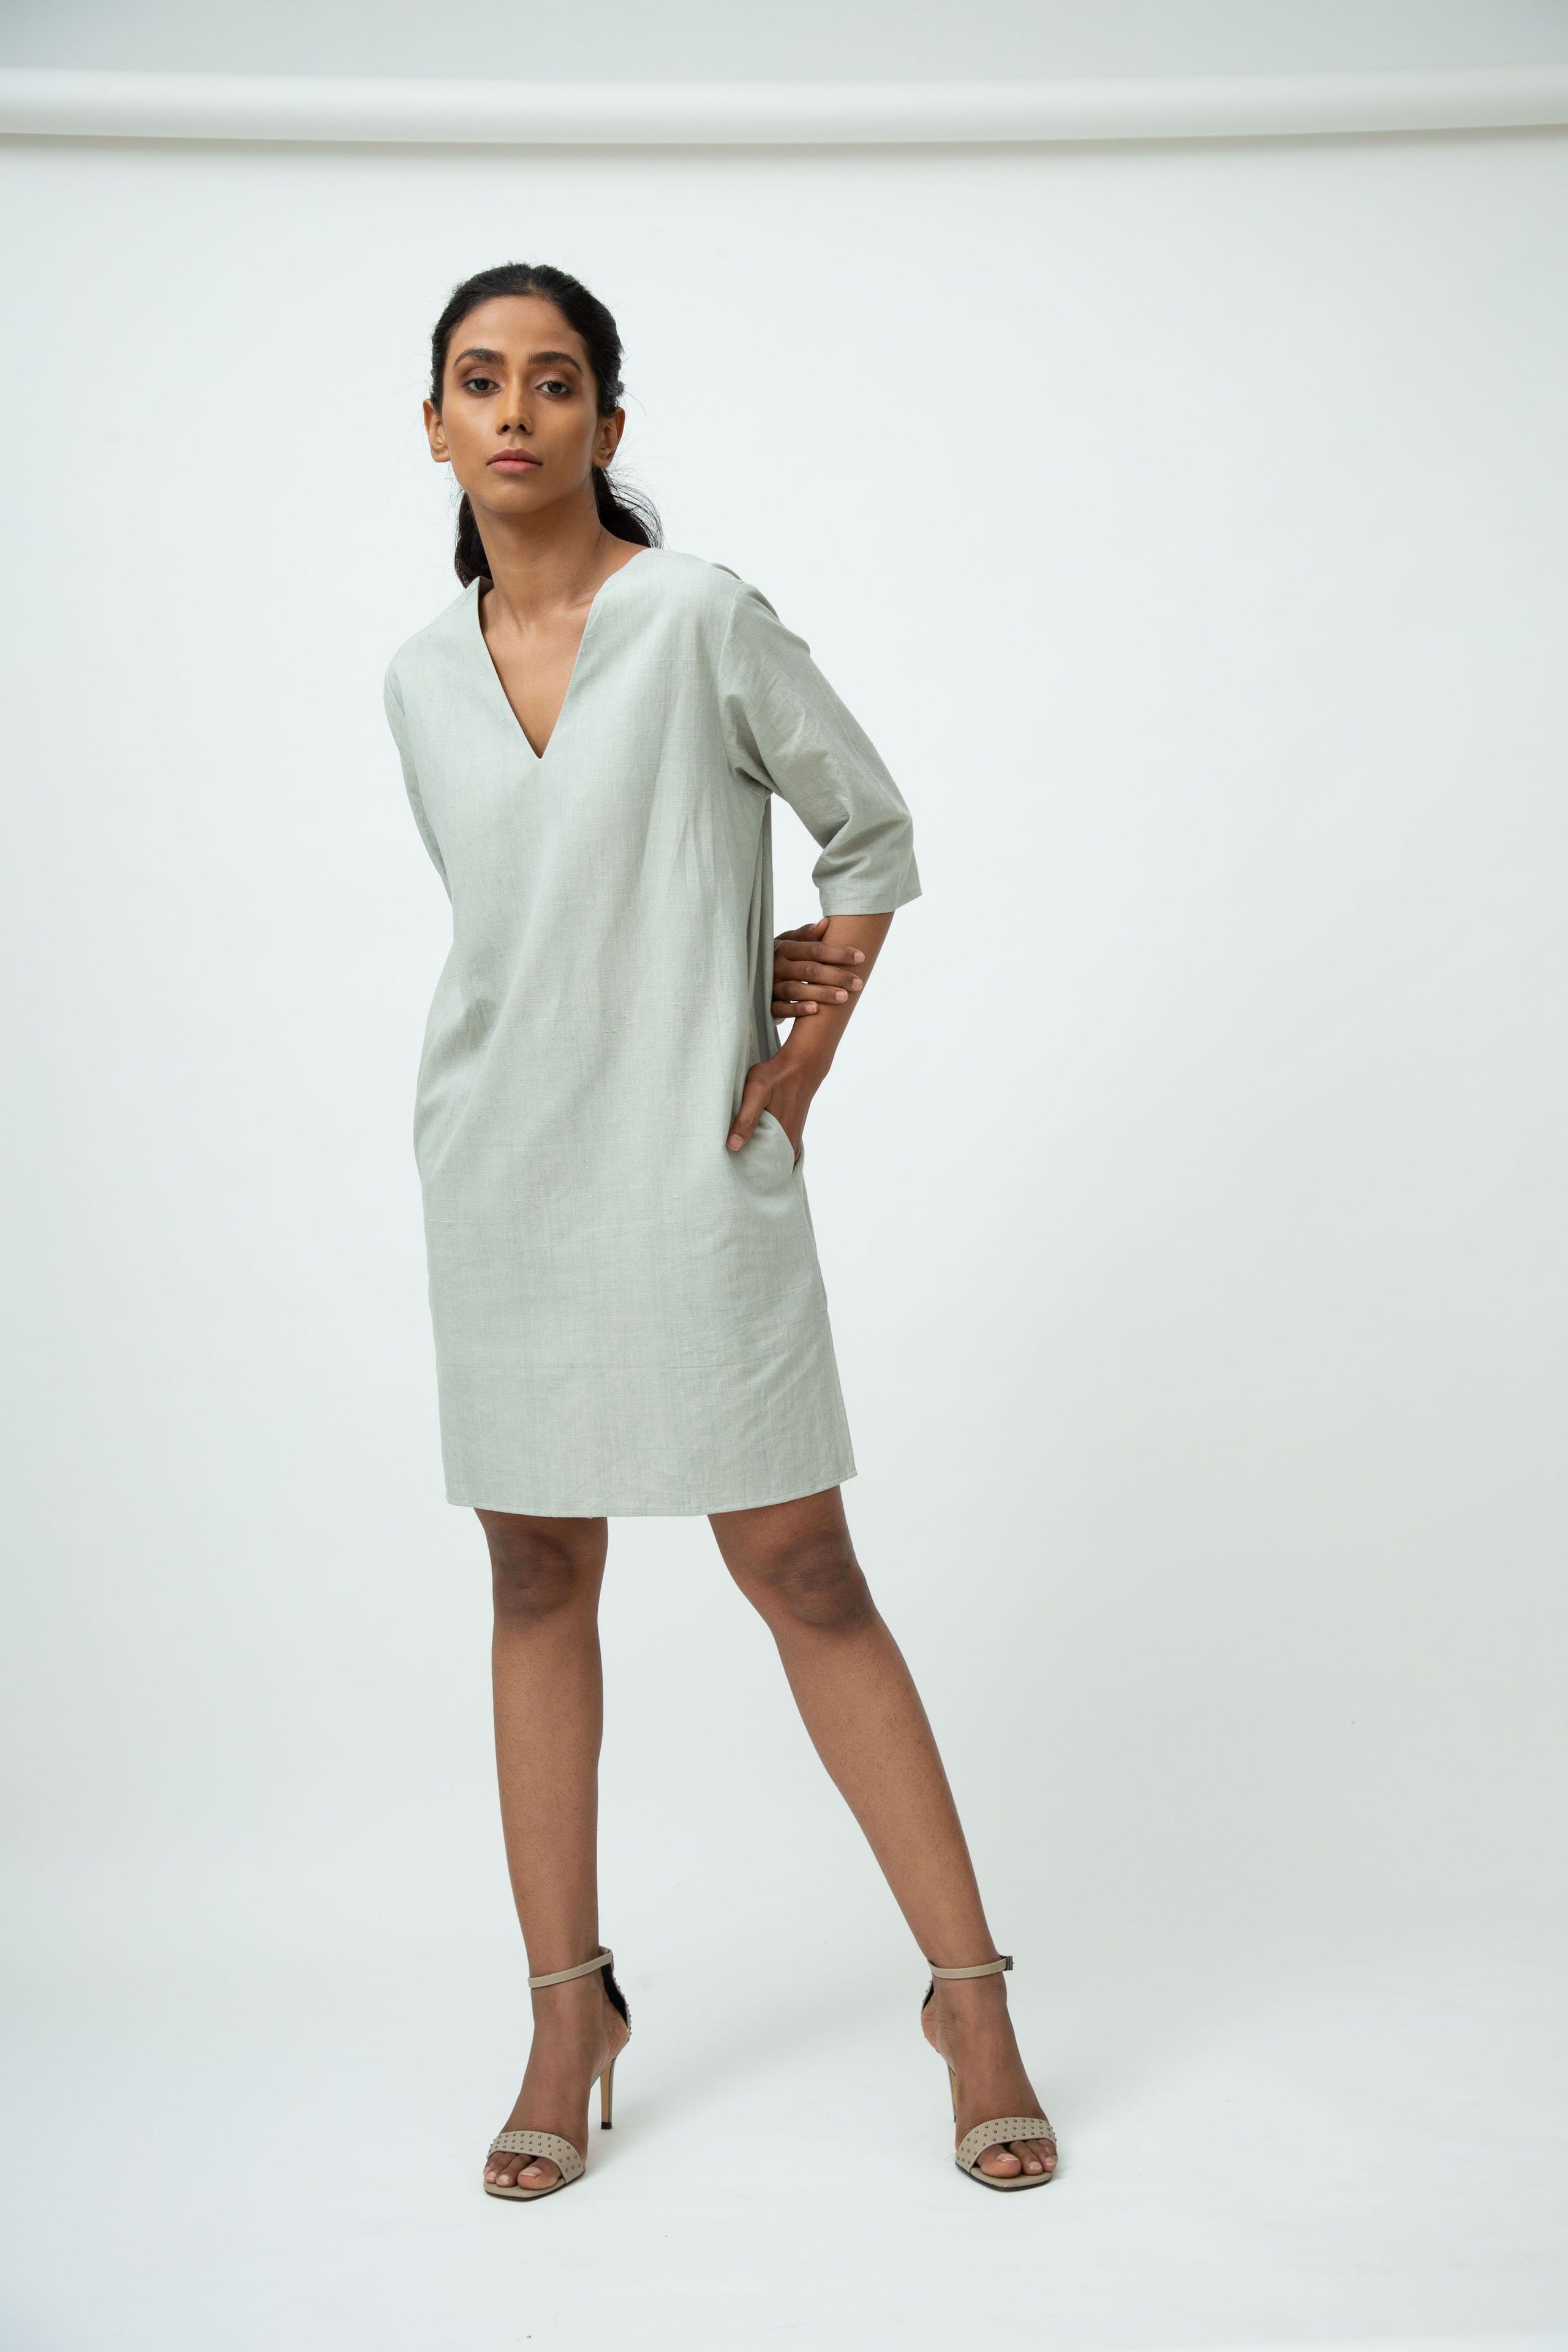 Saltpetre womens casual and lounge wear - cloud grey. Three-quarter sleeves with v-shaped neck one-piece.